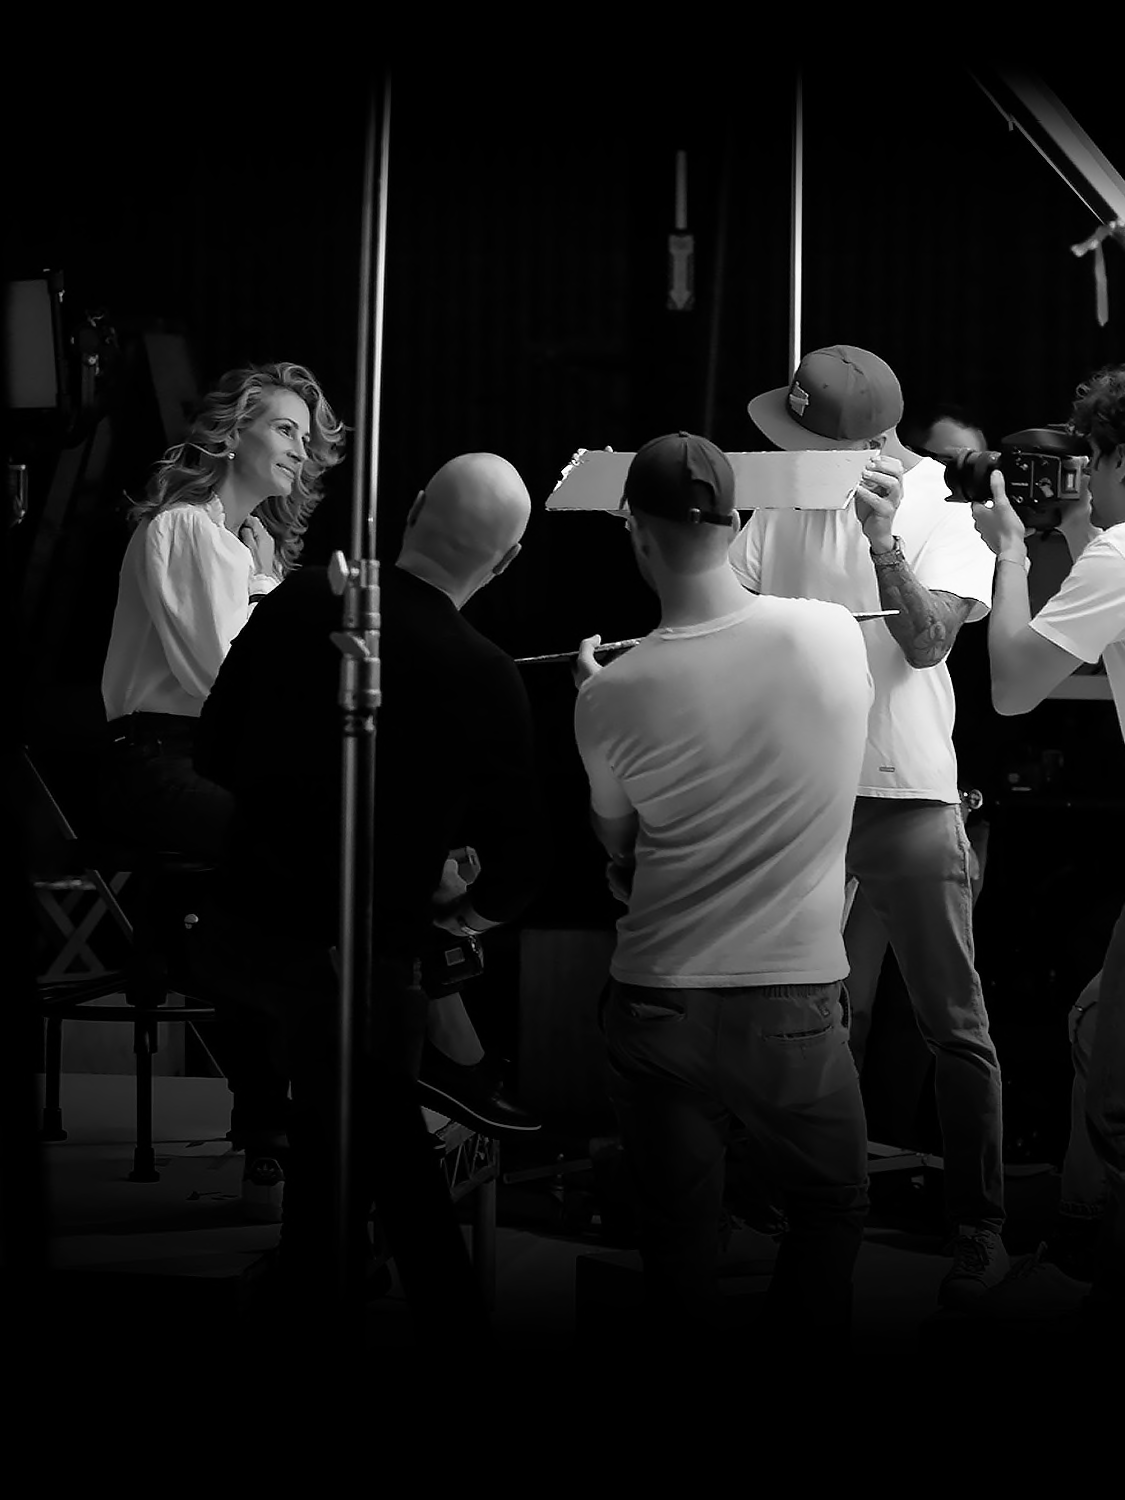 Behind the scenes picture of Julia Roberts surrounded by four photographers